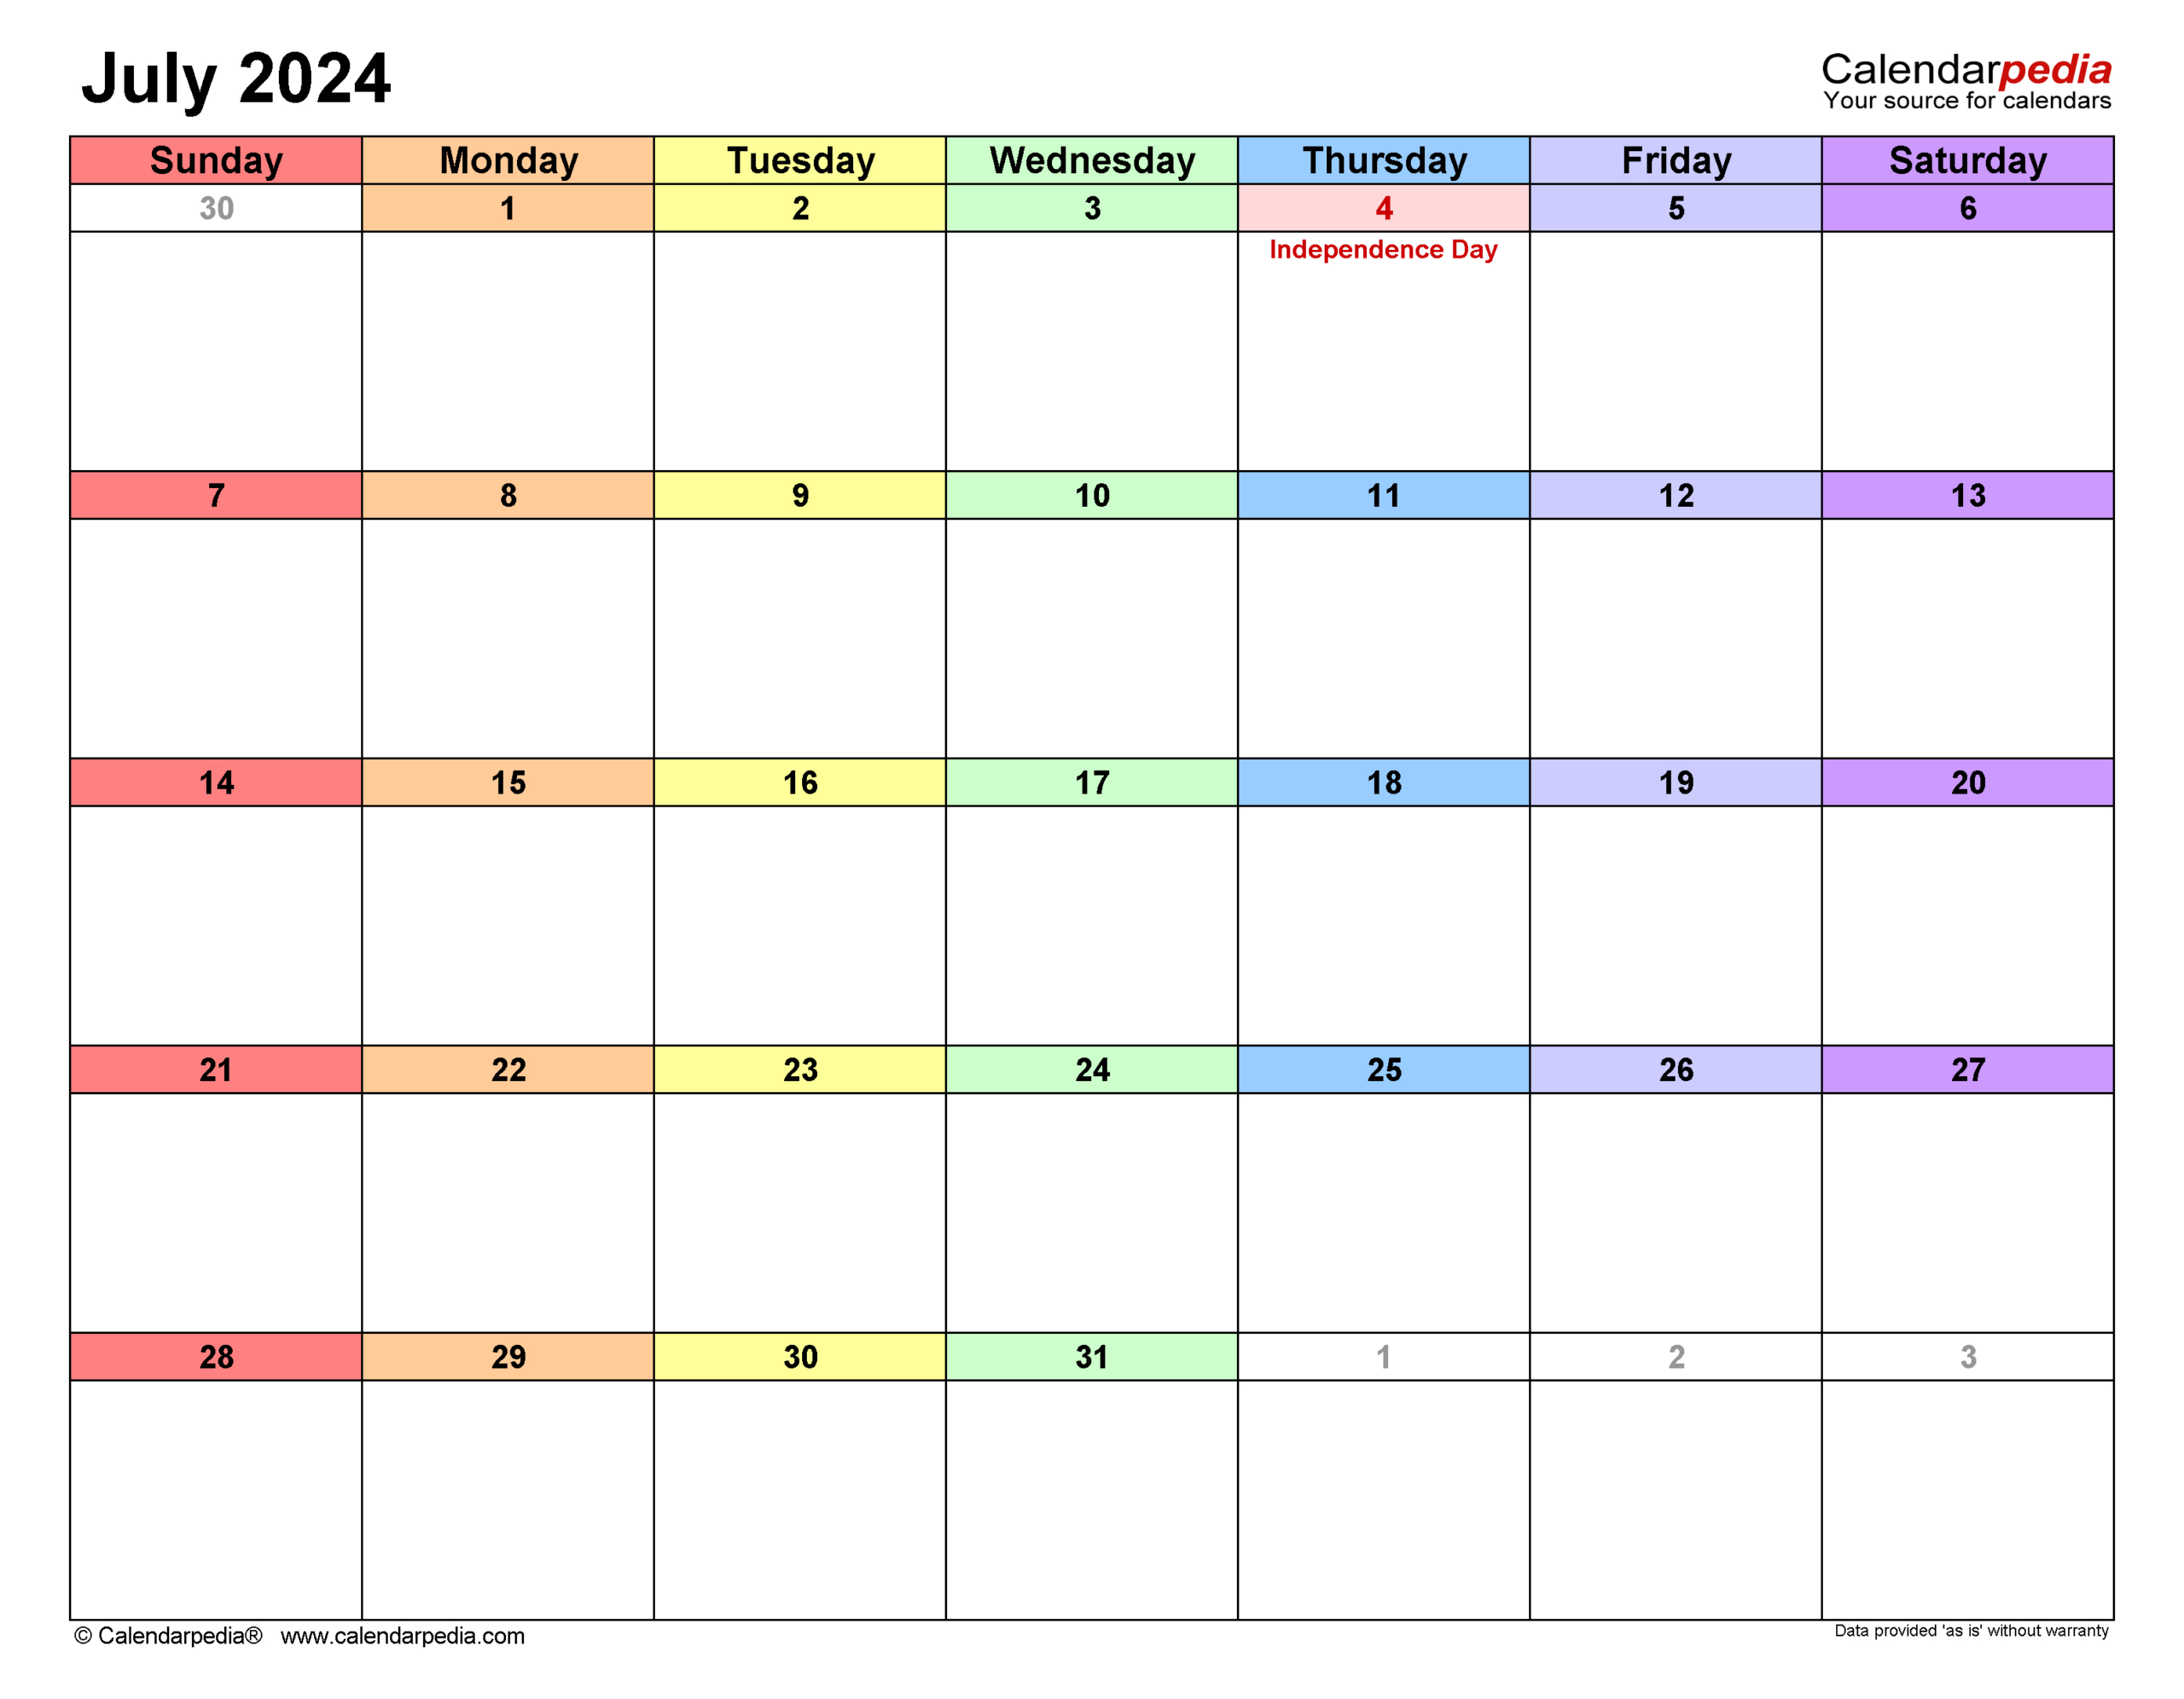 July 2024 Calendar | Templates For Word, Excel And Pdf with regard to Fillable Calendar July 2024